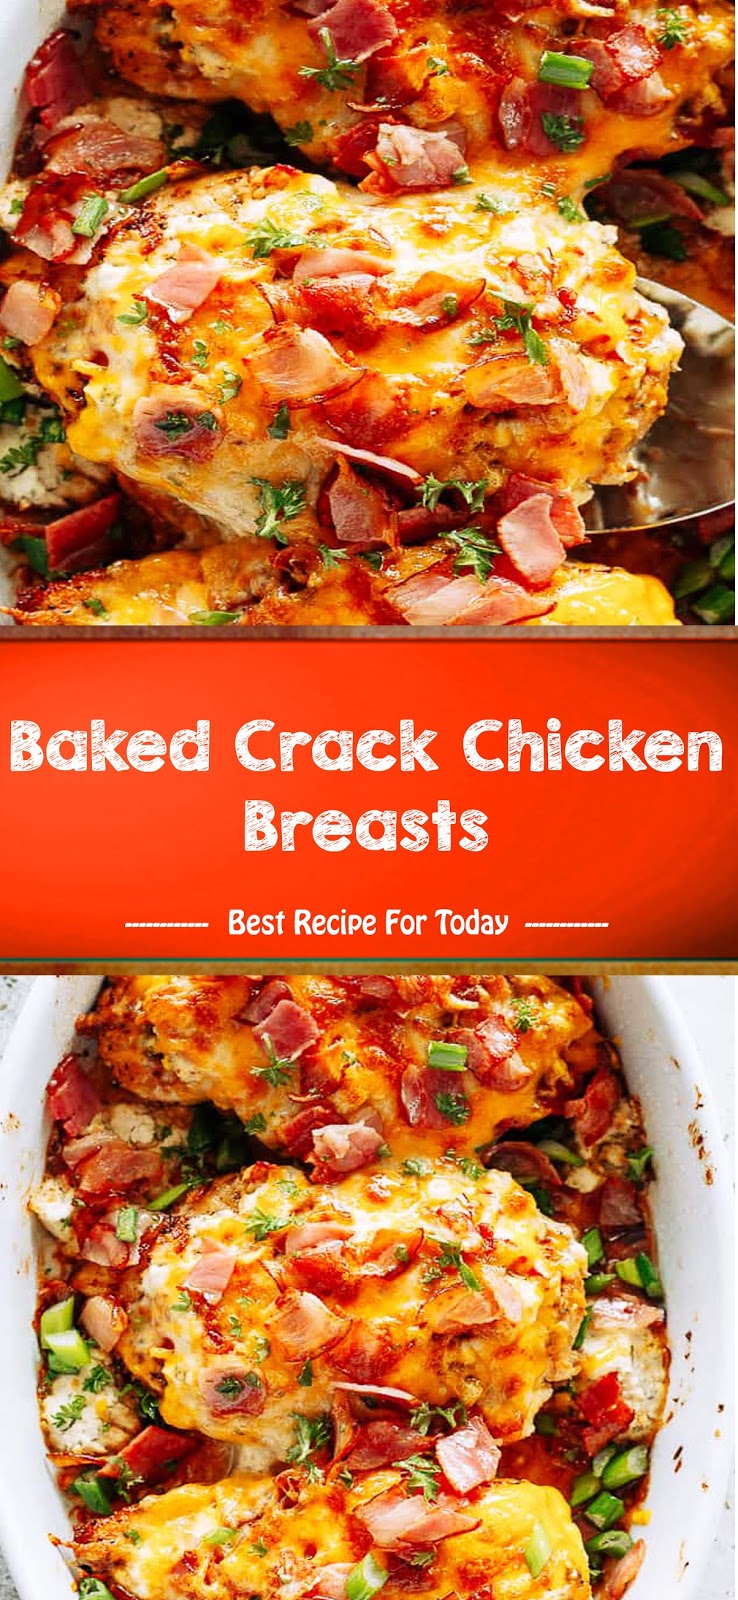 Baked Crack Chicken Breasts